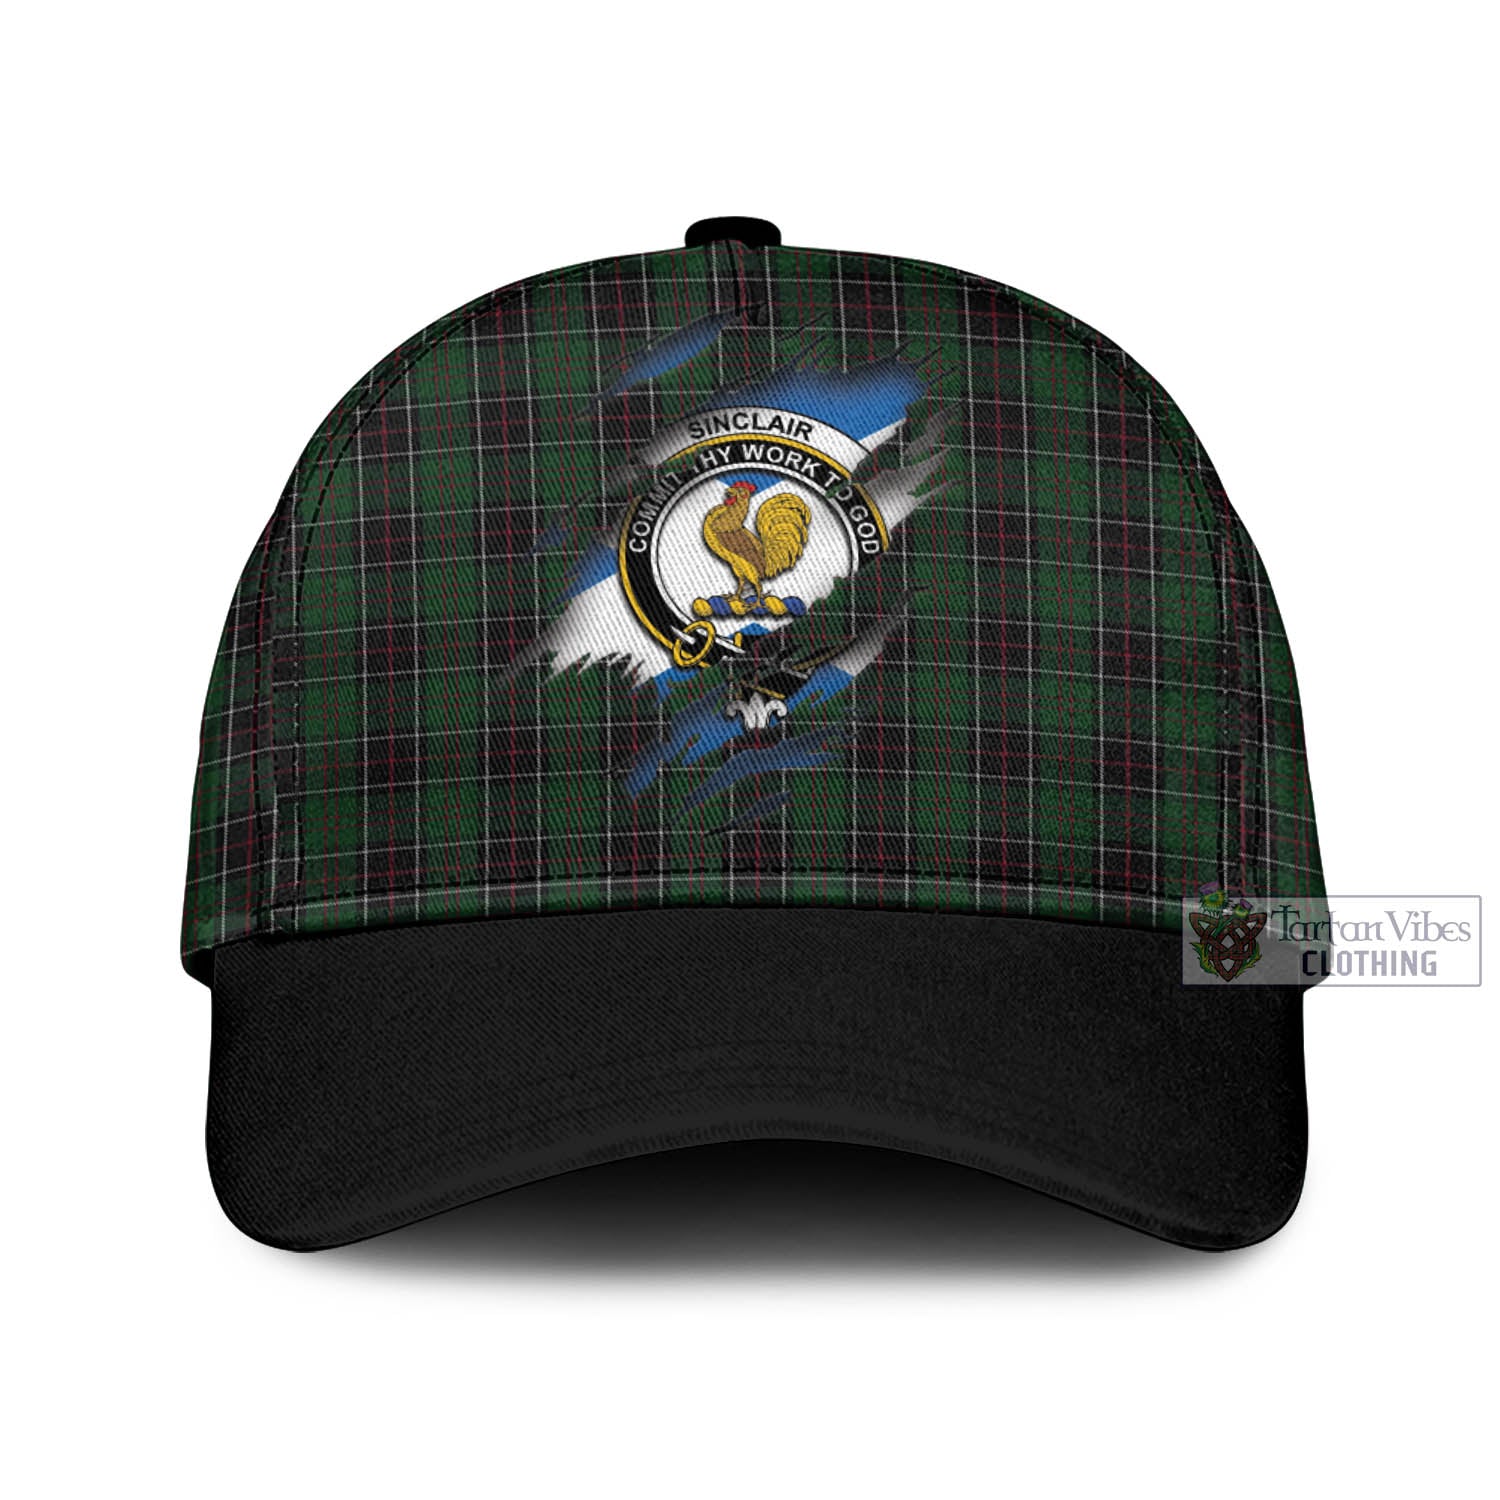 Tartan Vibes Clothing Sinclair Hunting Tartan Classic Cap with Family Crest In Me Style